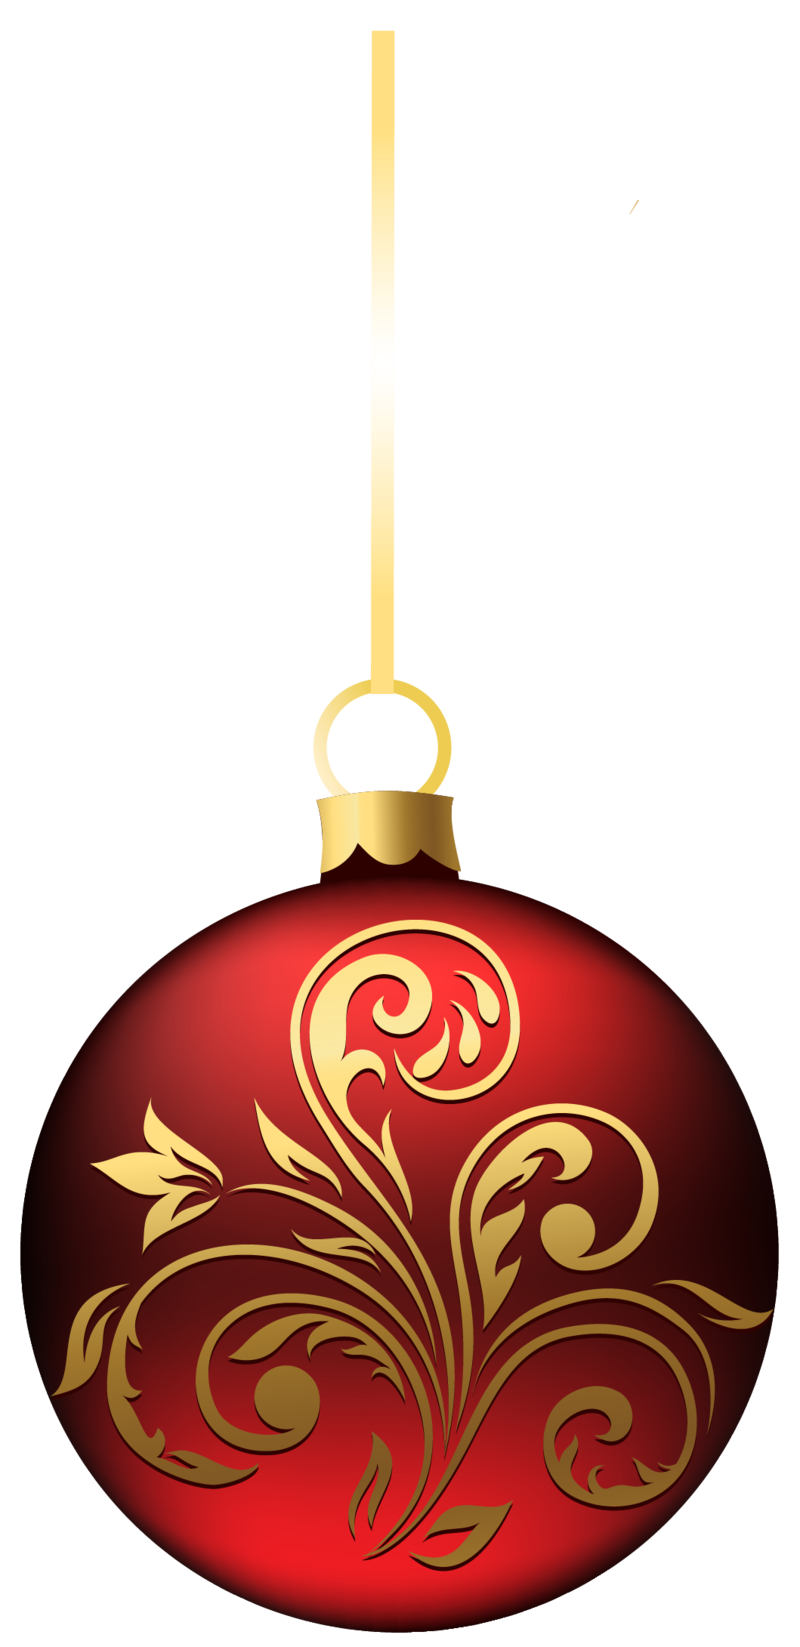 Large_Transparent_BlueRed_Christmas_Ball_Ornament_PNG_Clipart.png